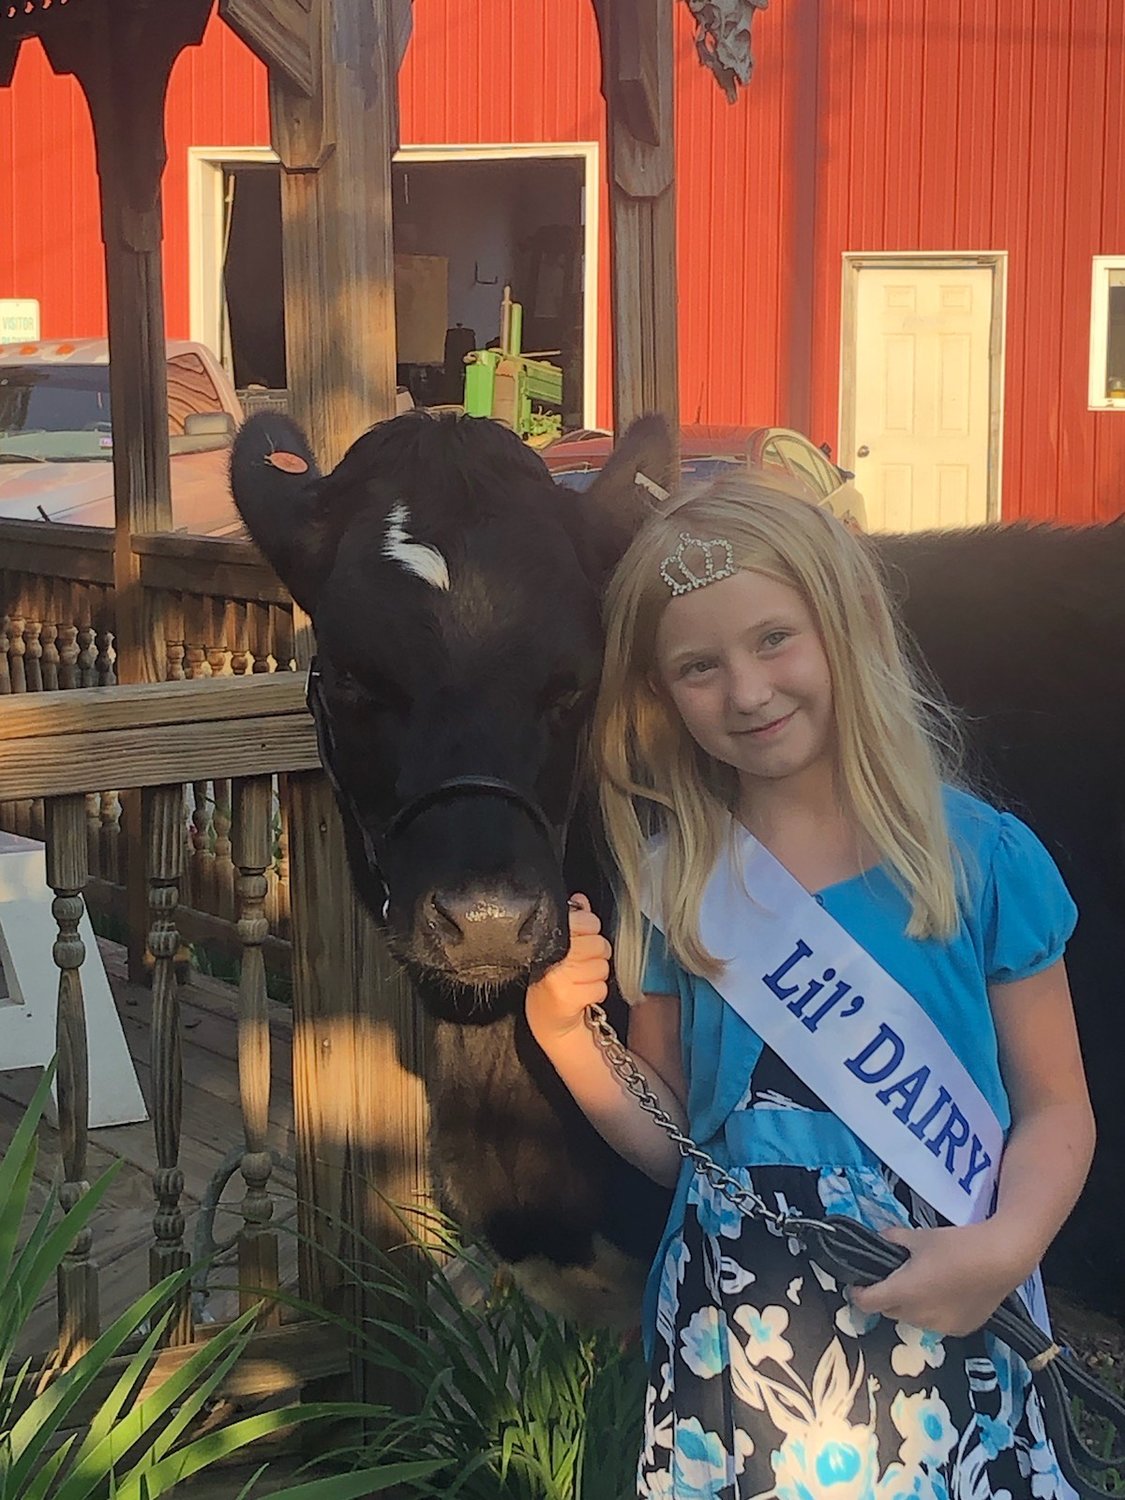 Dairy is high in nutrients and tastes good too. Wayne County Lil Dairy Miss Chloe Tyler explains the importance of dairy in our diets.